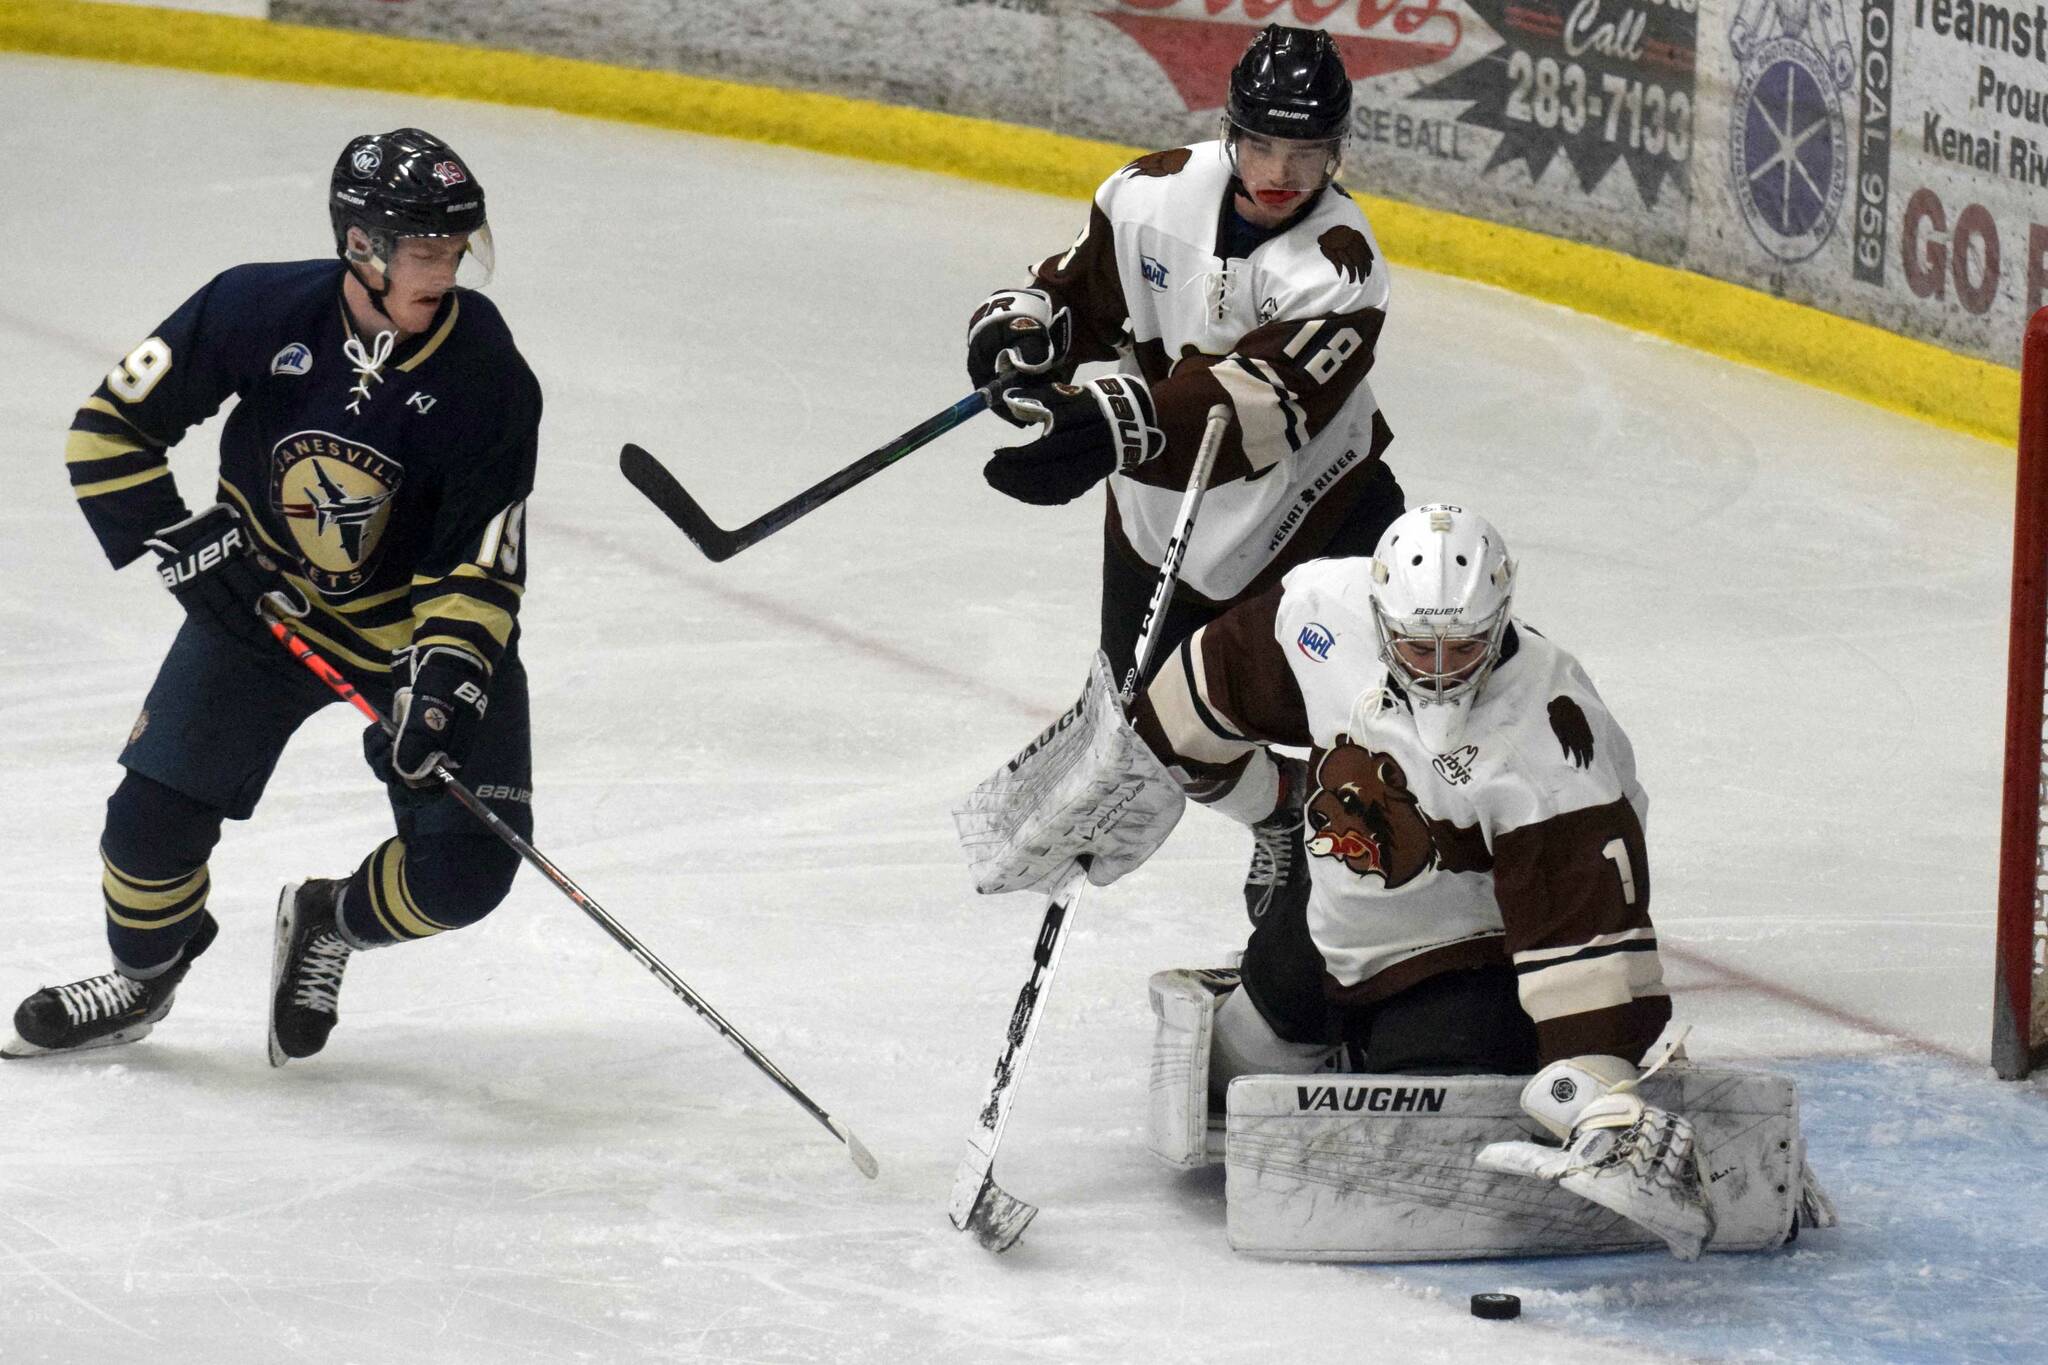 Kenai River Brown Bears goalie Luke Pavicich covers up the puck in front of Shane Ott of the Janesville (Wisconsin) Jets as Brown Bears defenseman Brendan Hill looks on Thursday, April 29, 2021, at the Soldotna Regional Sports Complex in Soldotna, Alaska. (Photo by Jeff Helminiak/Peninsula Clarion)